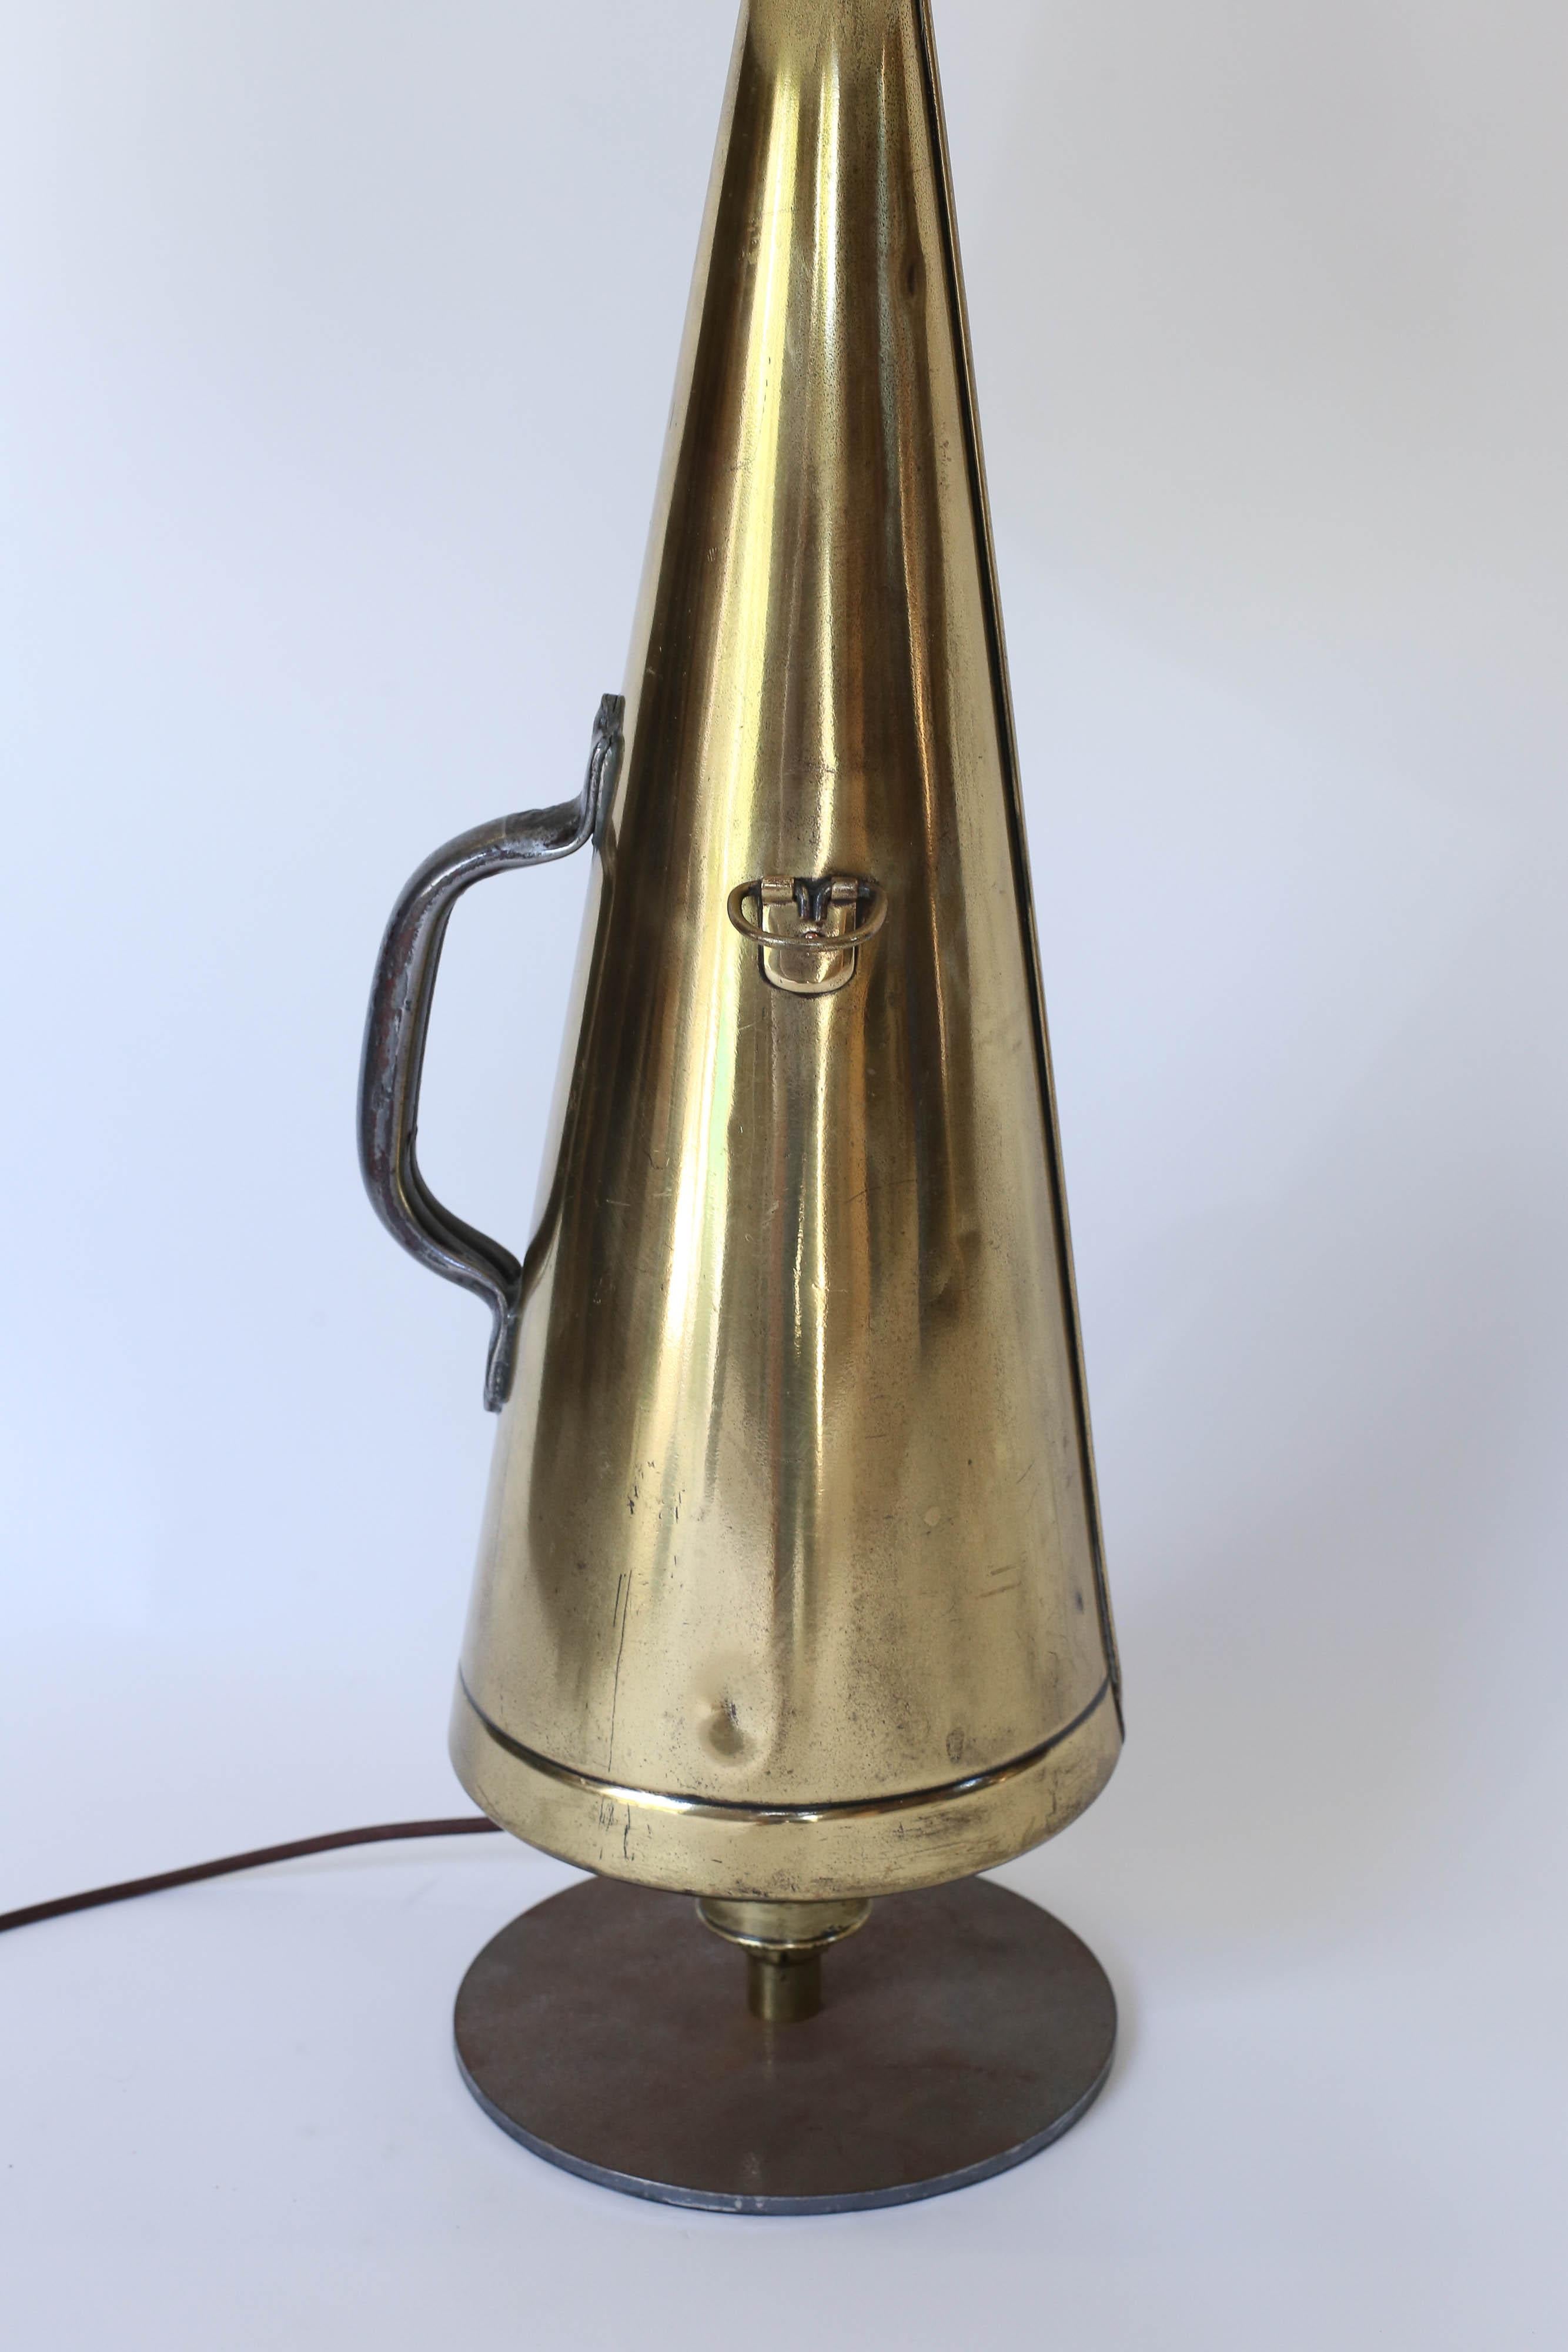 Found in England and newly wired in the United States, a vintage brass megaphone repurposed as a table lamp. In the shape and style of the Classic brass megaphone used on British sailing vessels this table lamp is sure to delight.